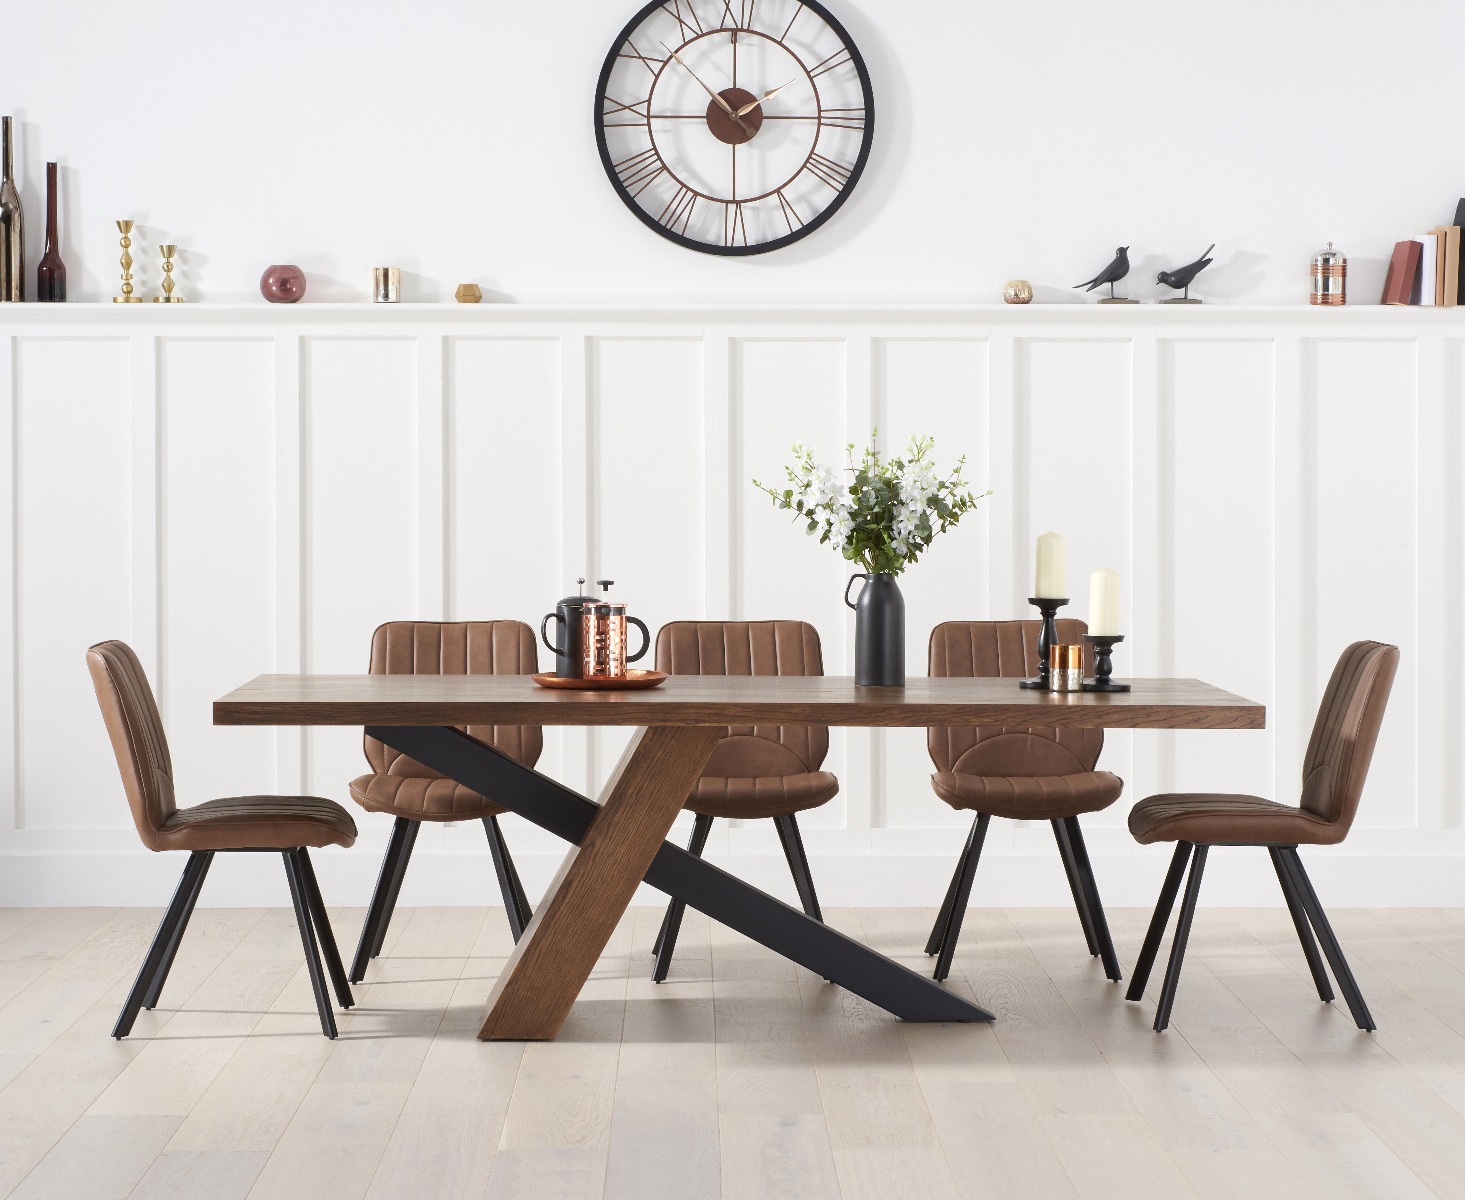 Michigan 180cm Rustic Oak And Metal Black Leg Industrial Dining Table With 8 Grey Hendrick Chairs